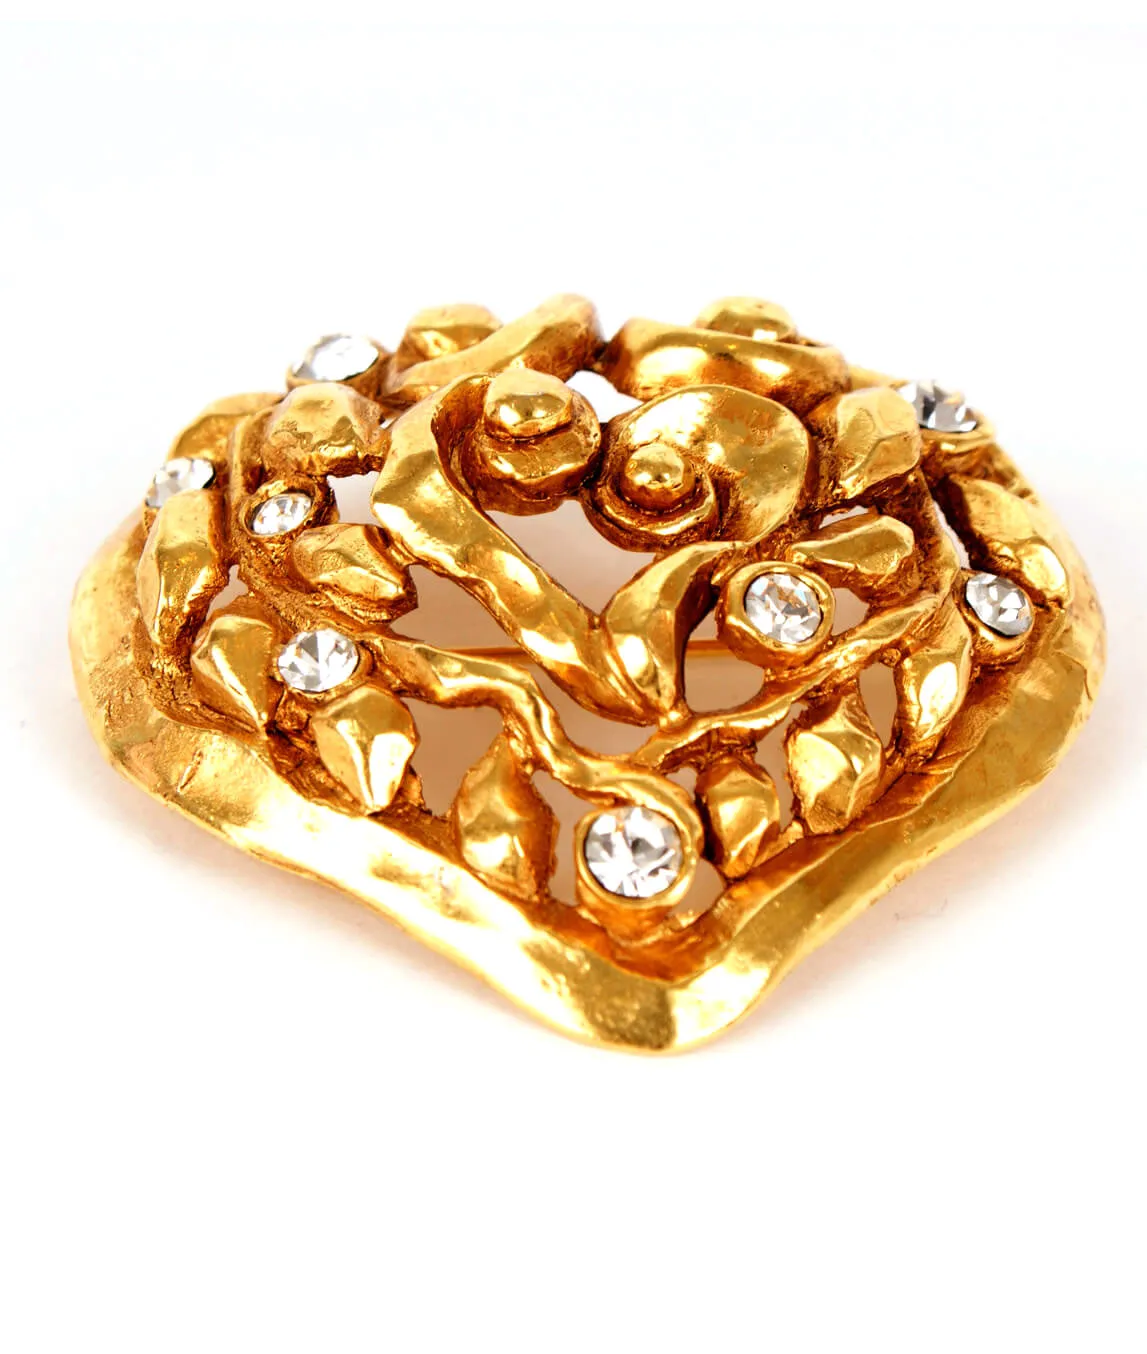 Lacroix Christmas heart brooch 